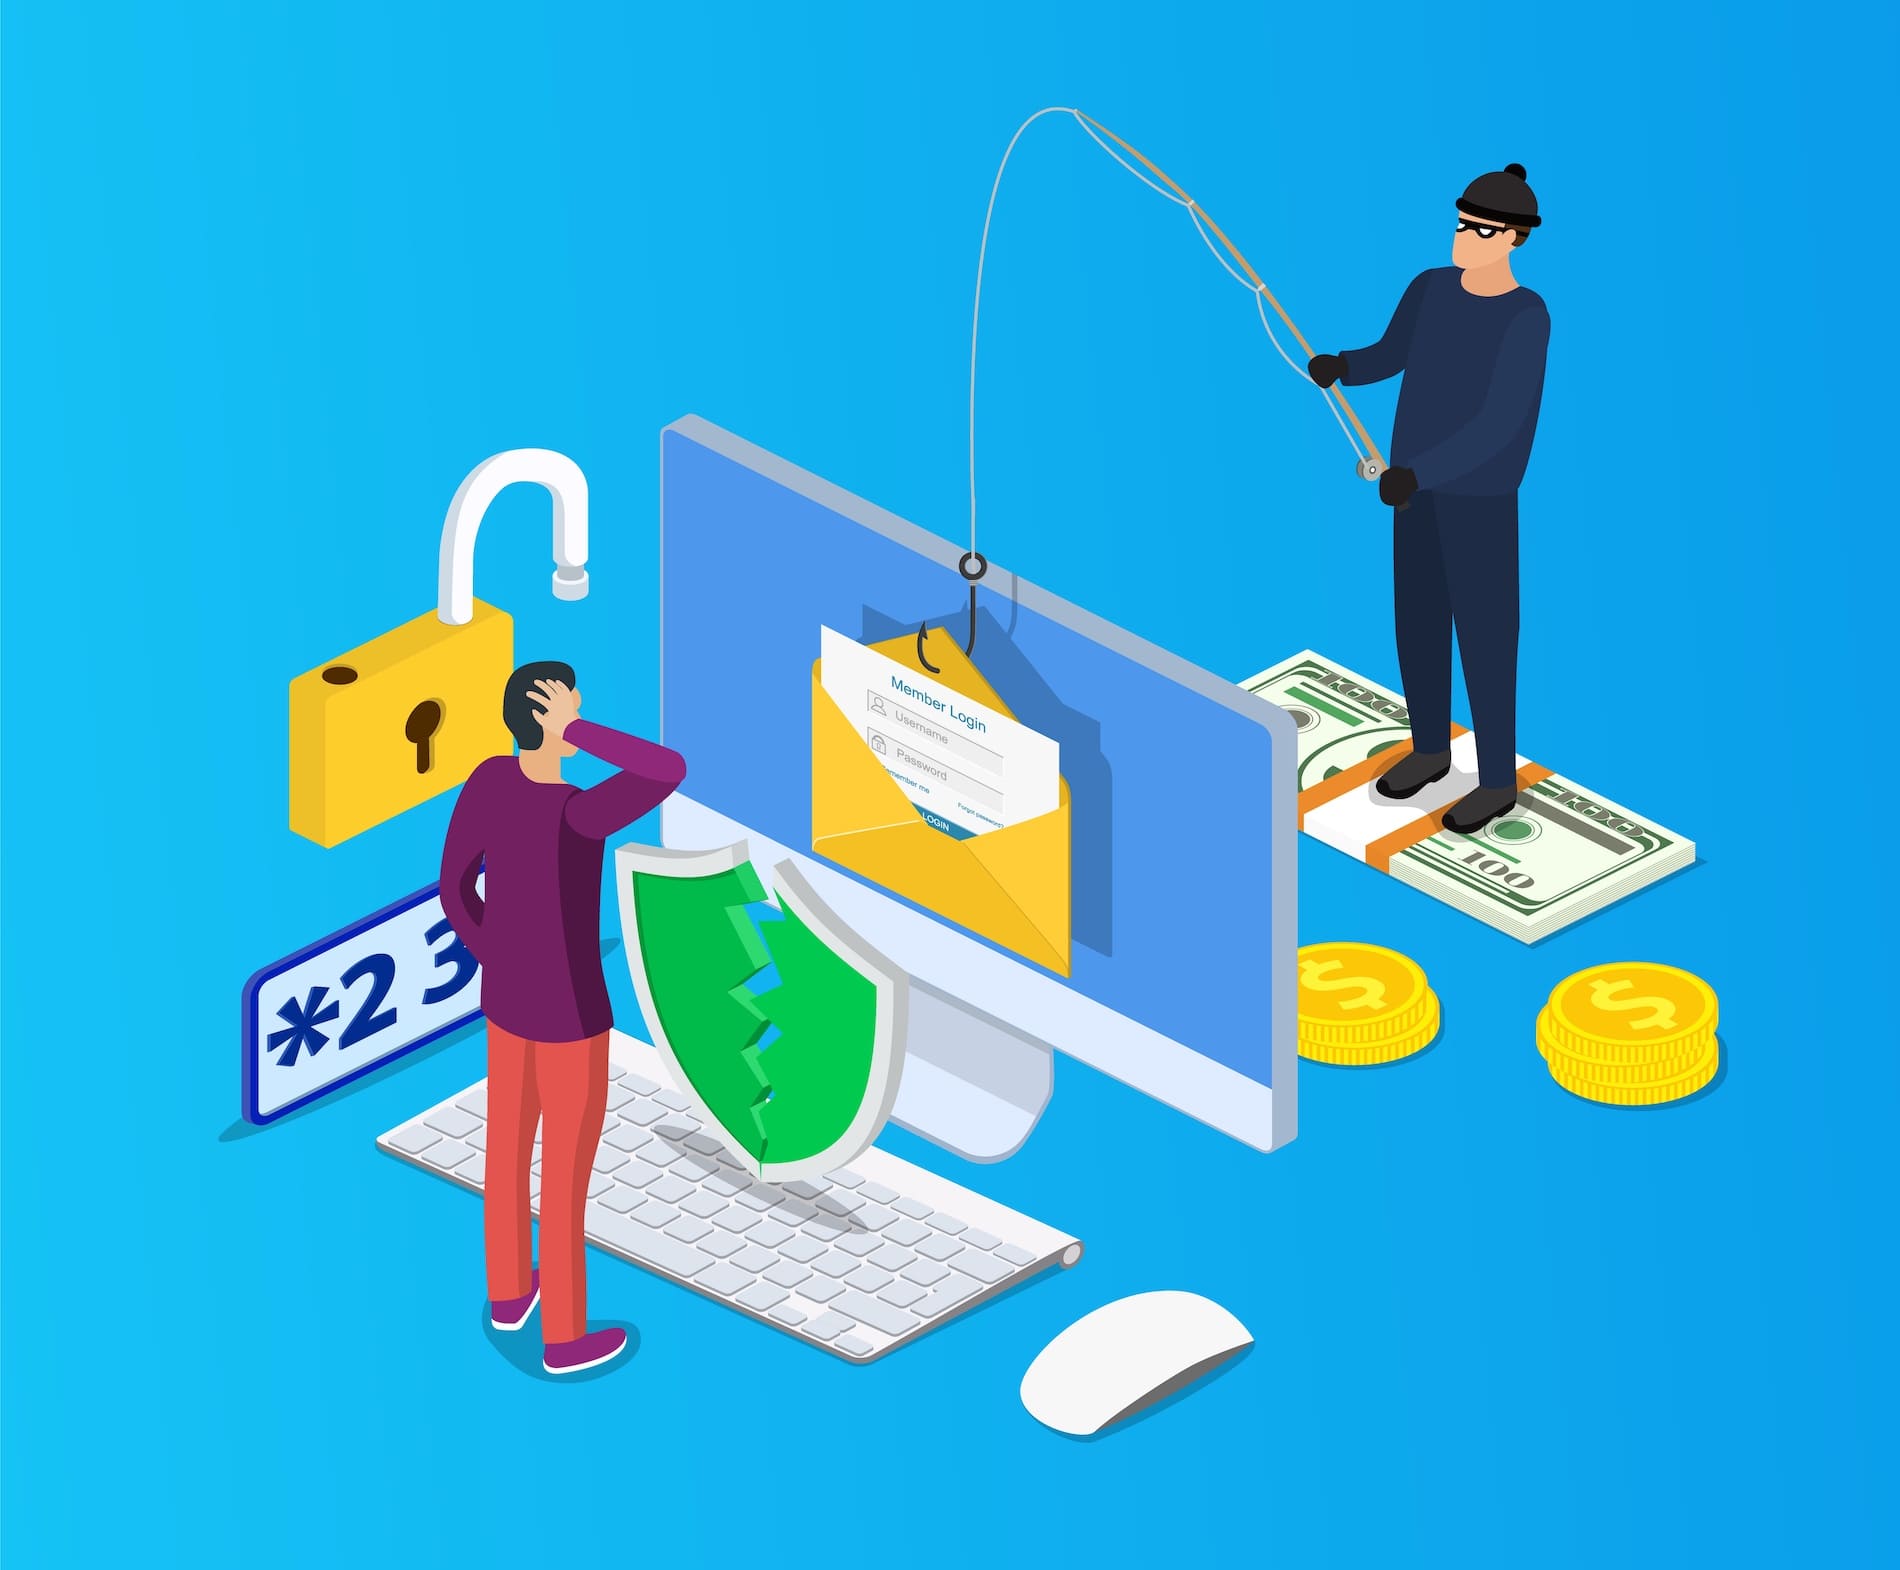 Windows 11 version 22H2: Phishing Protection – Tech Tip For April 12, 2022